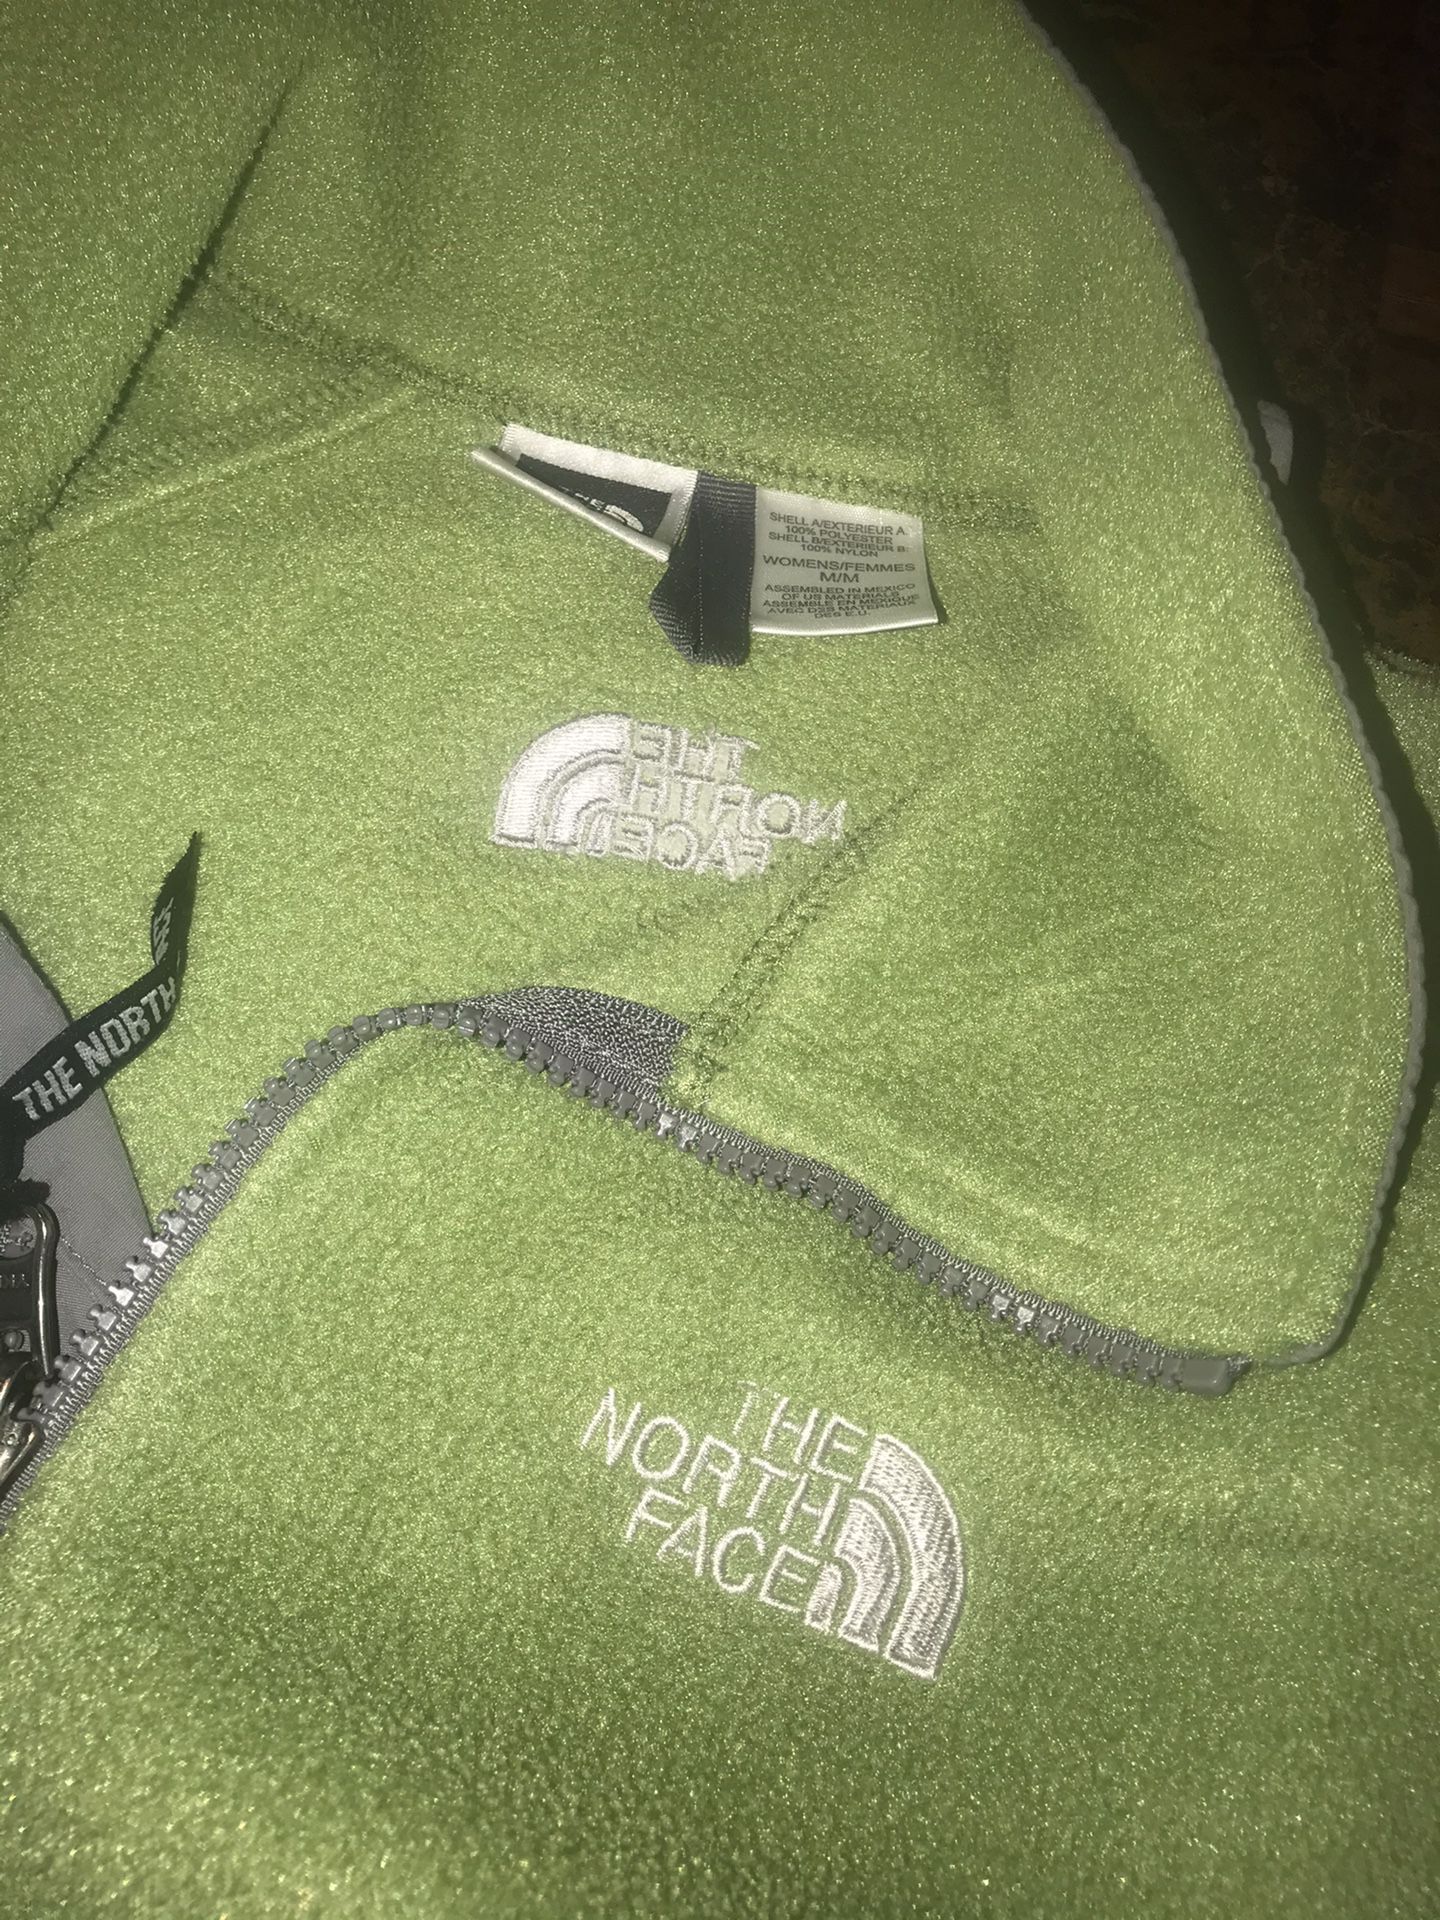 North face sweater